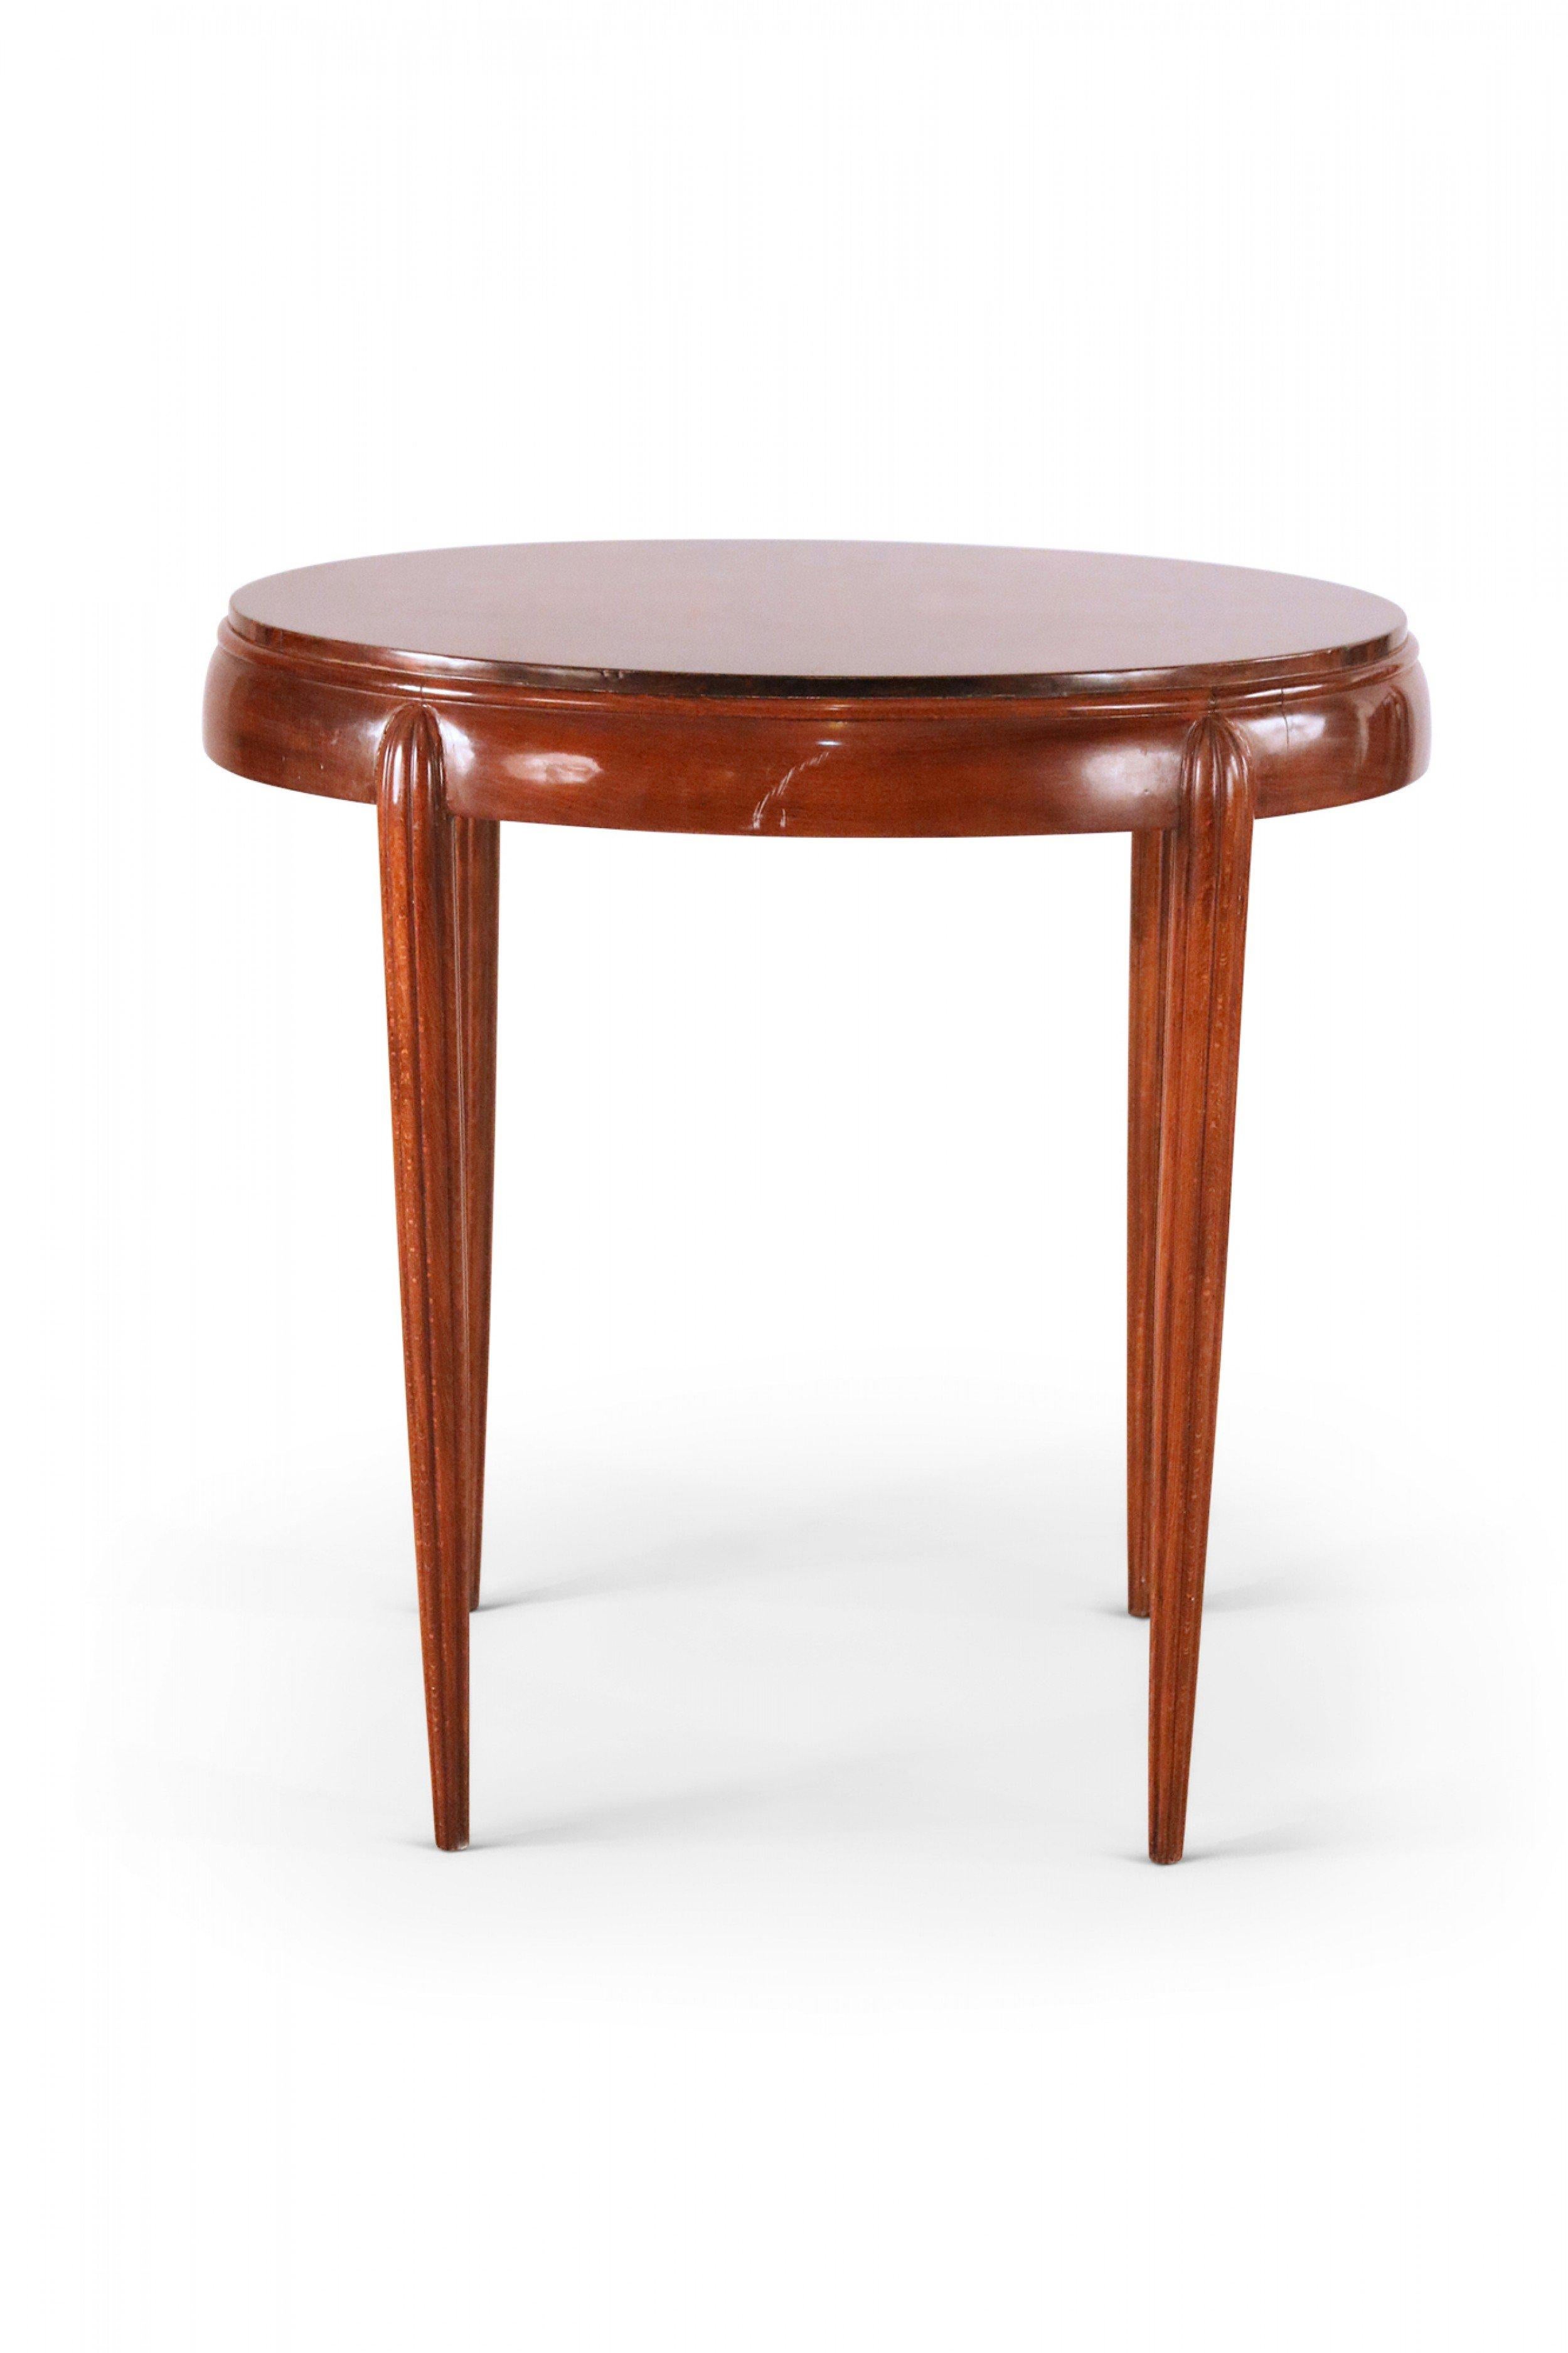 Vintage Art Deco-style oval mahogany side / end table with four tapered partially fluted legs.
  